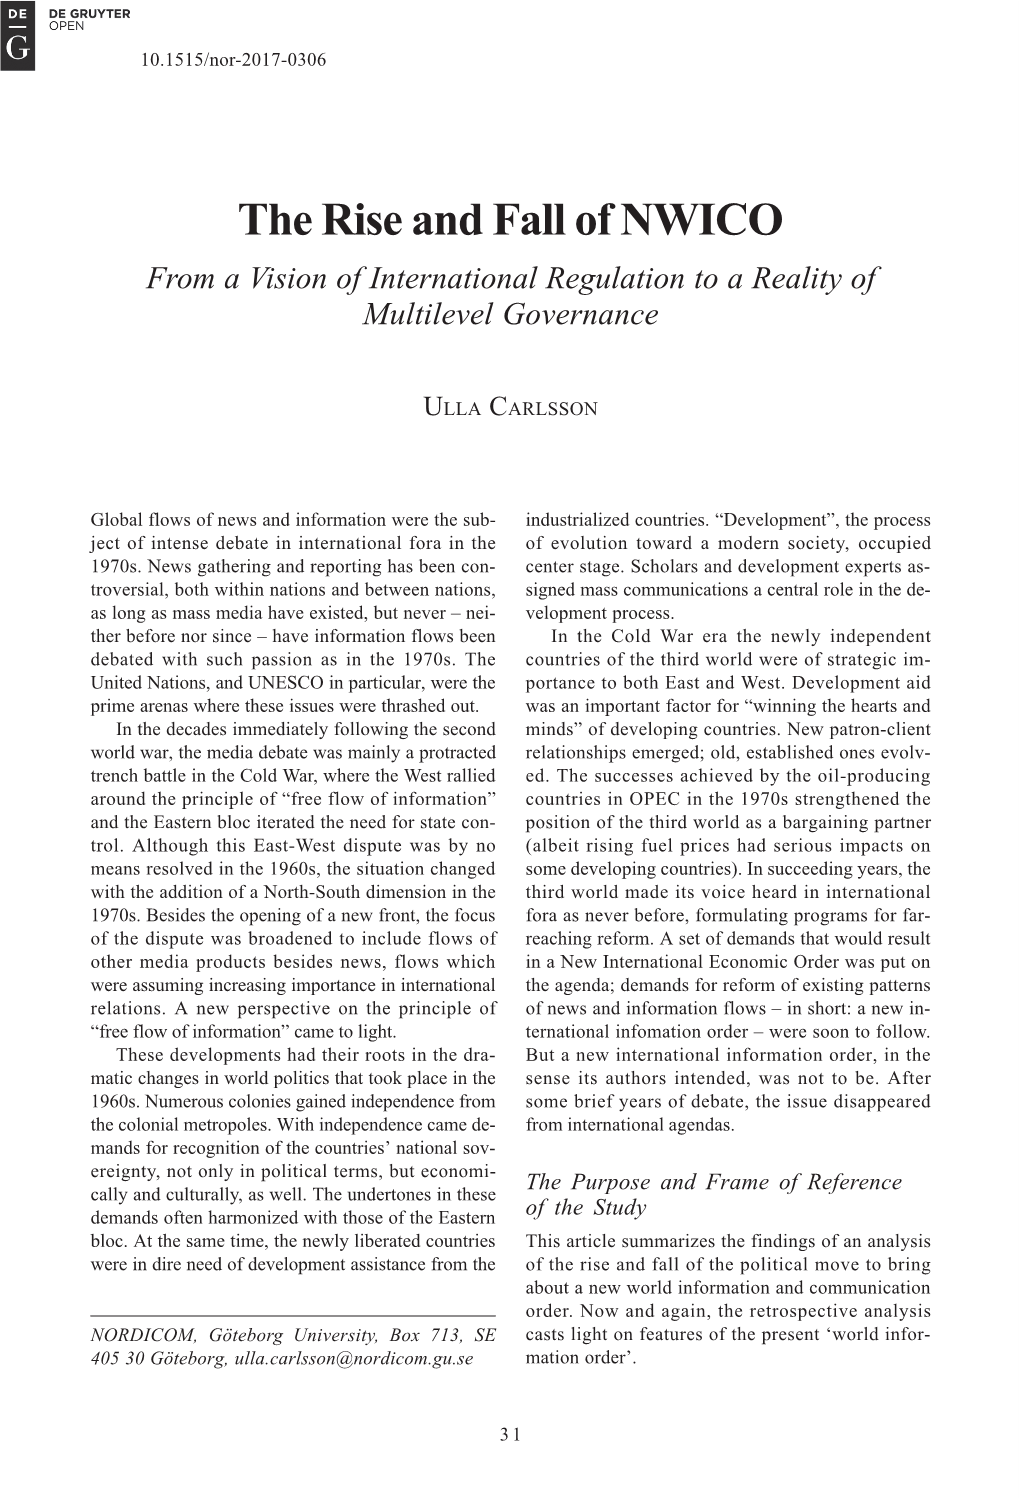 The Rise and Fall of NWICO from a Vision of International Regulation to a Reality of Multilevel Governance